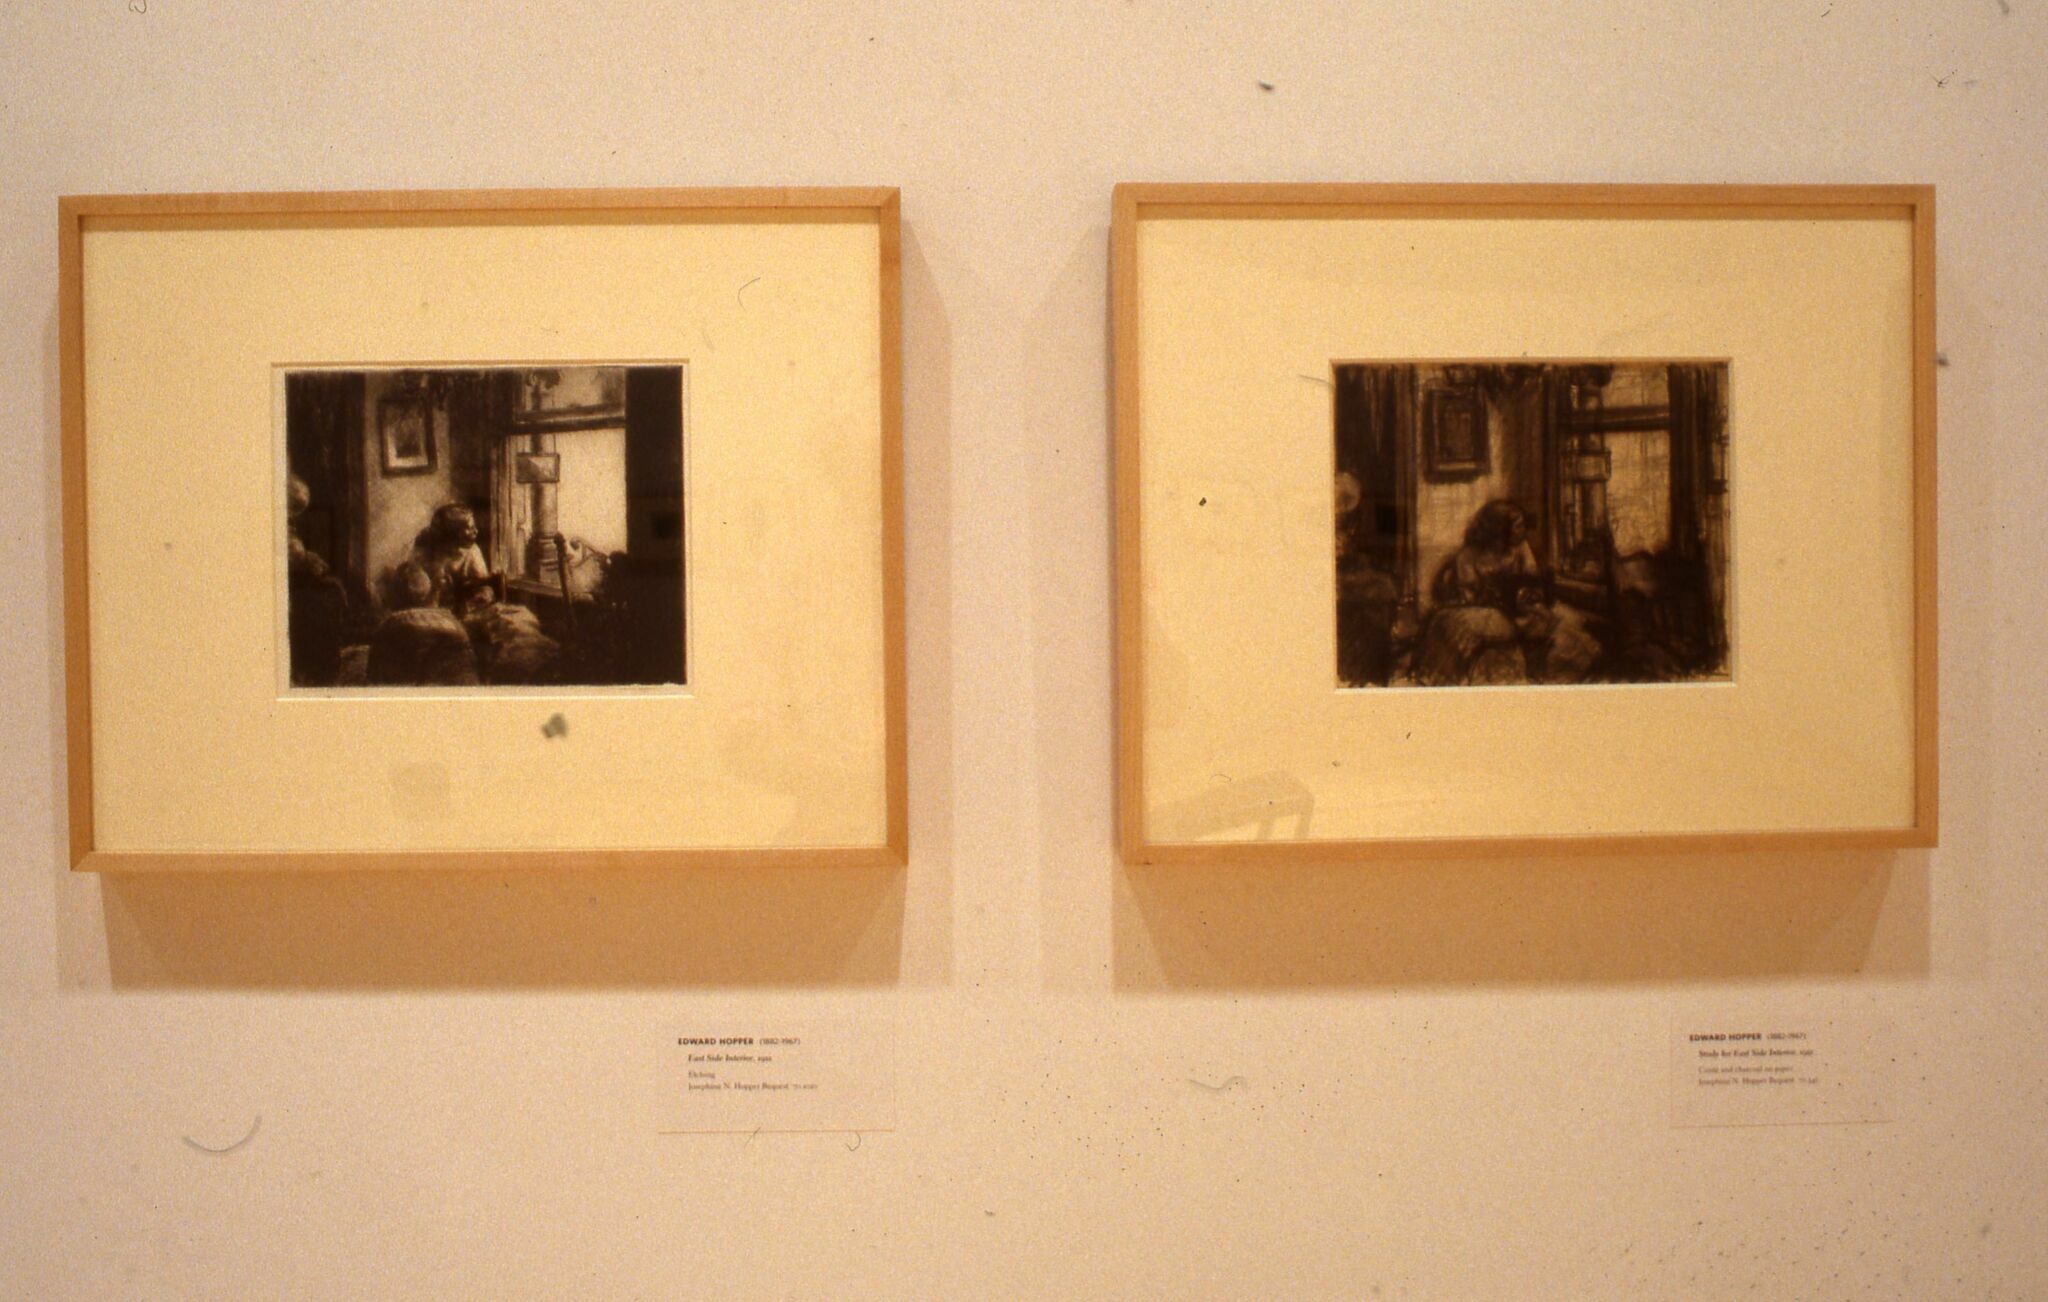 Two framed prints by Edward Hopper hung side by side on a white wall.